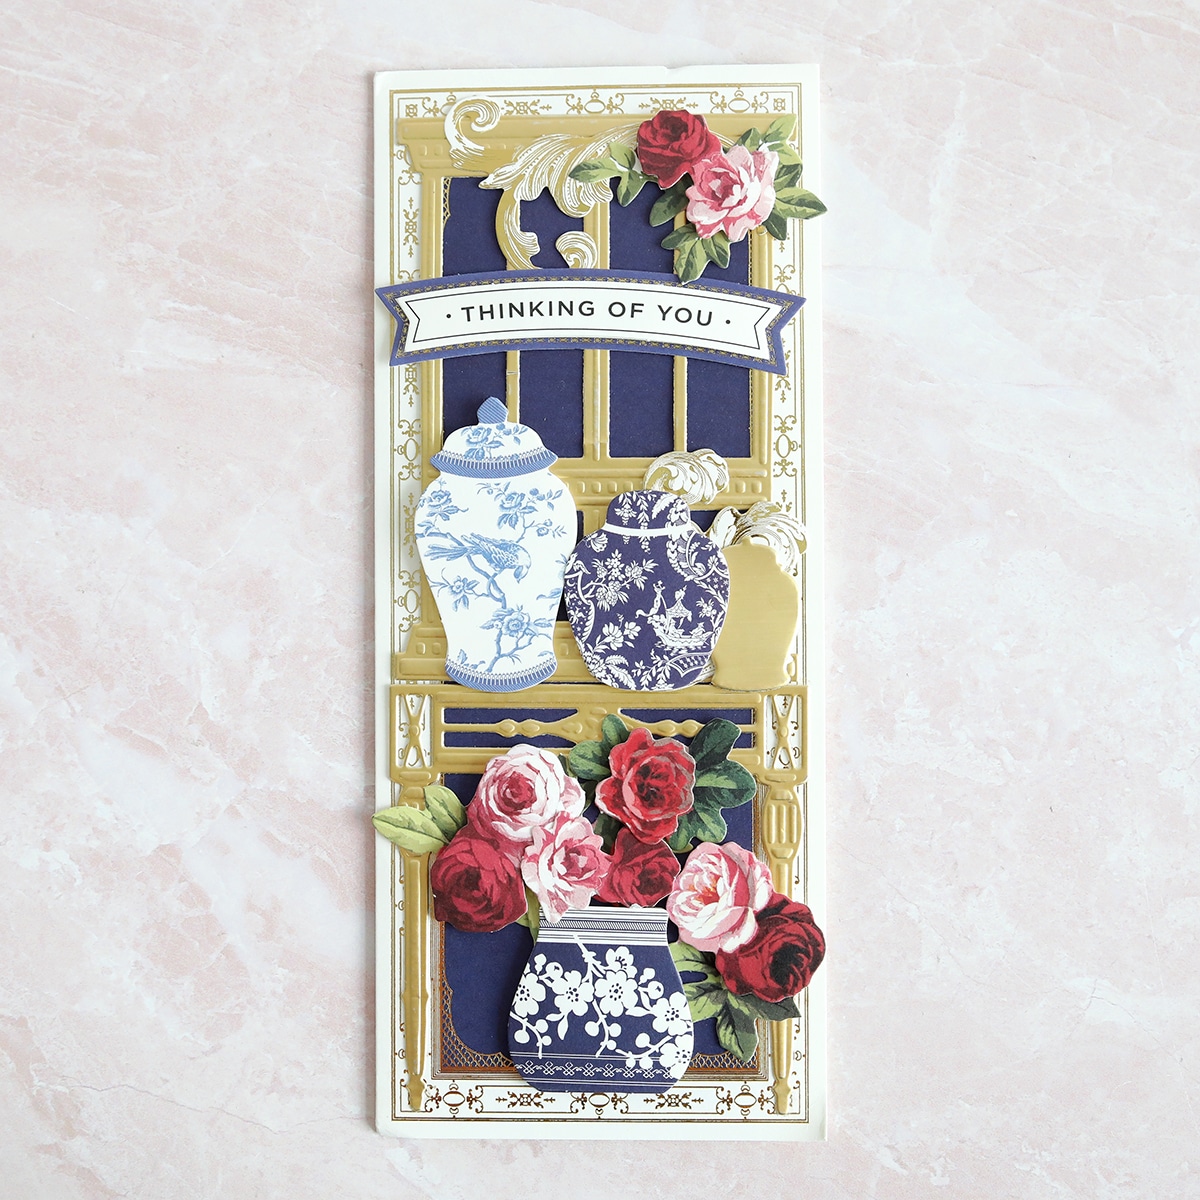 a card with flowers and vases on it.